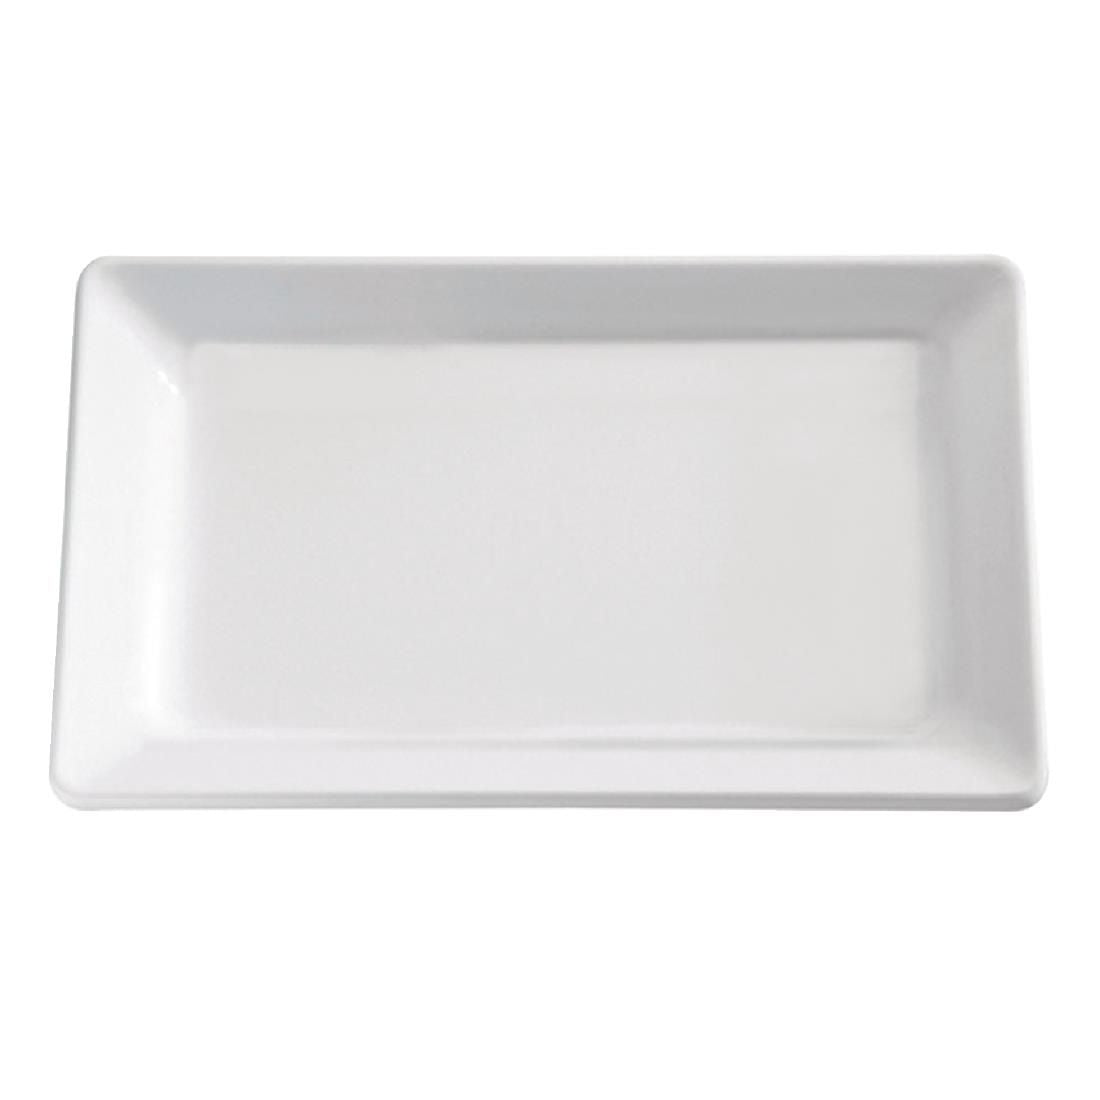 GF120 APS Pure Melamine Tray White GN 1/1 JD Catering Equipment Solutions Ltd